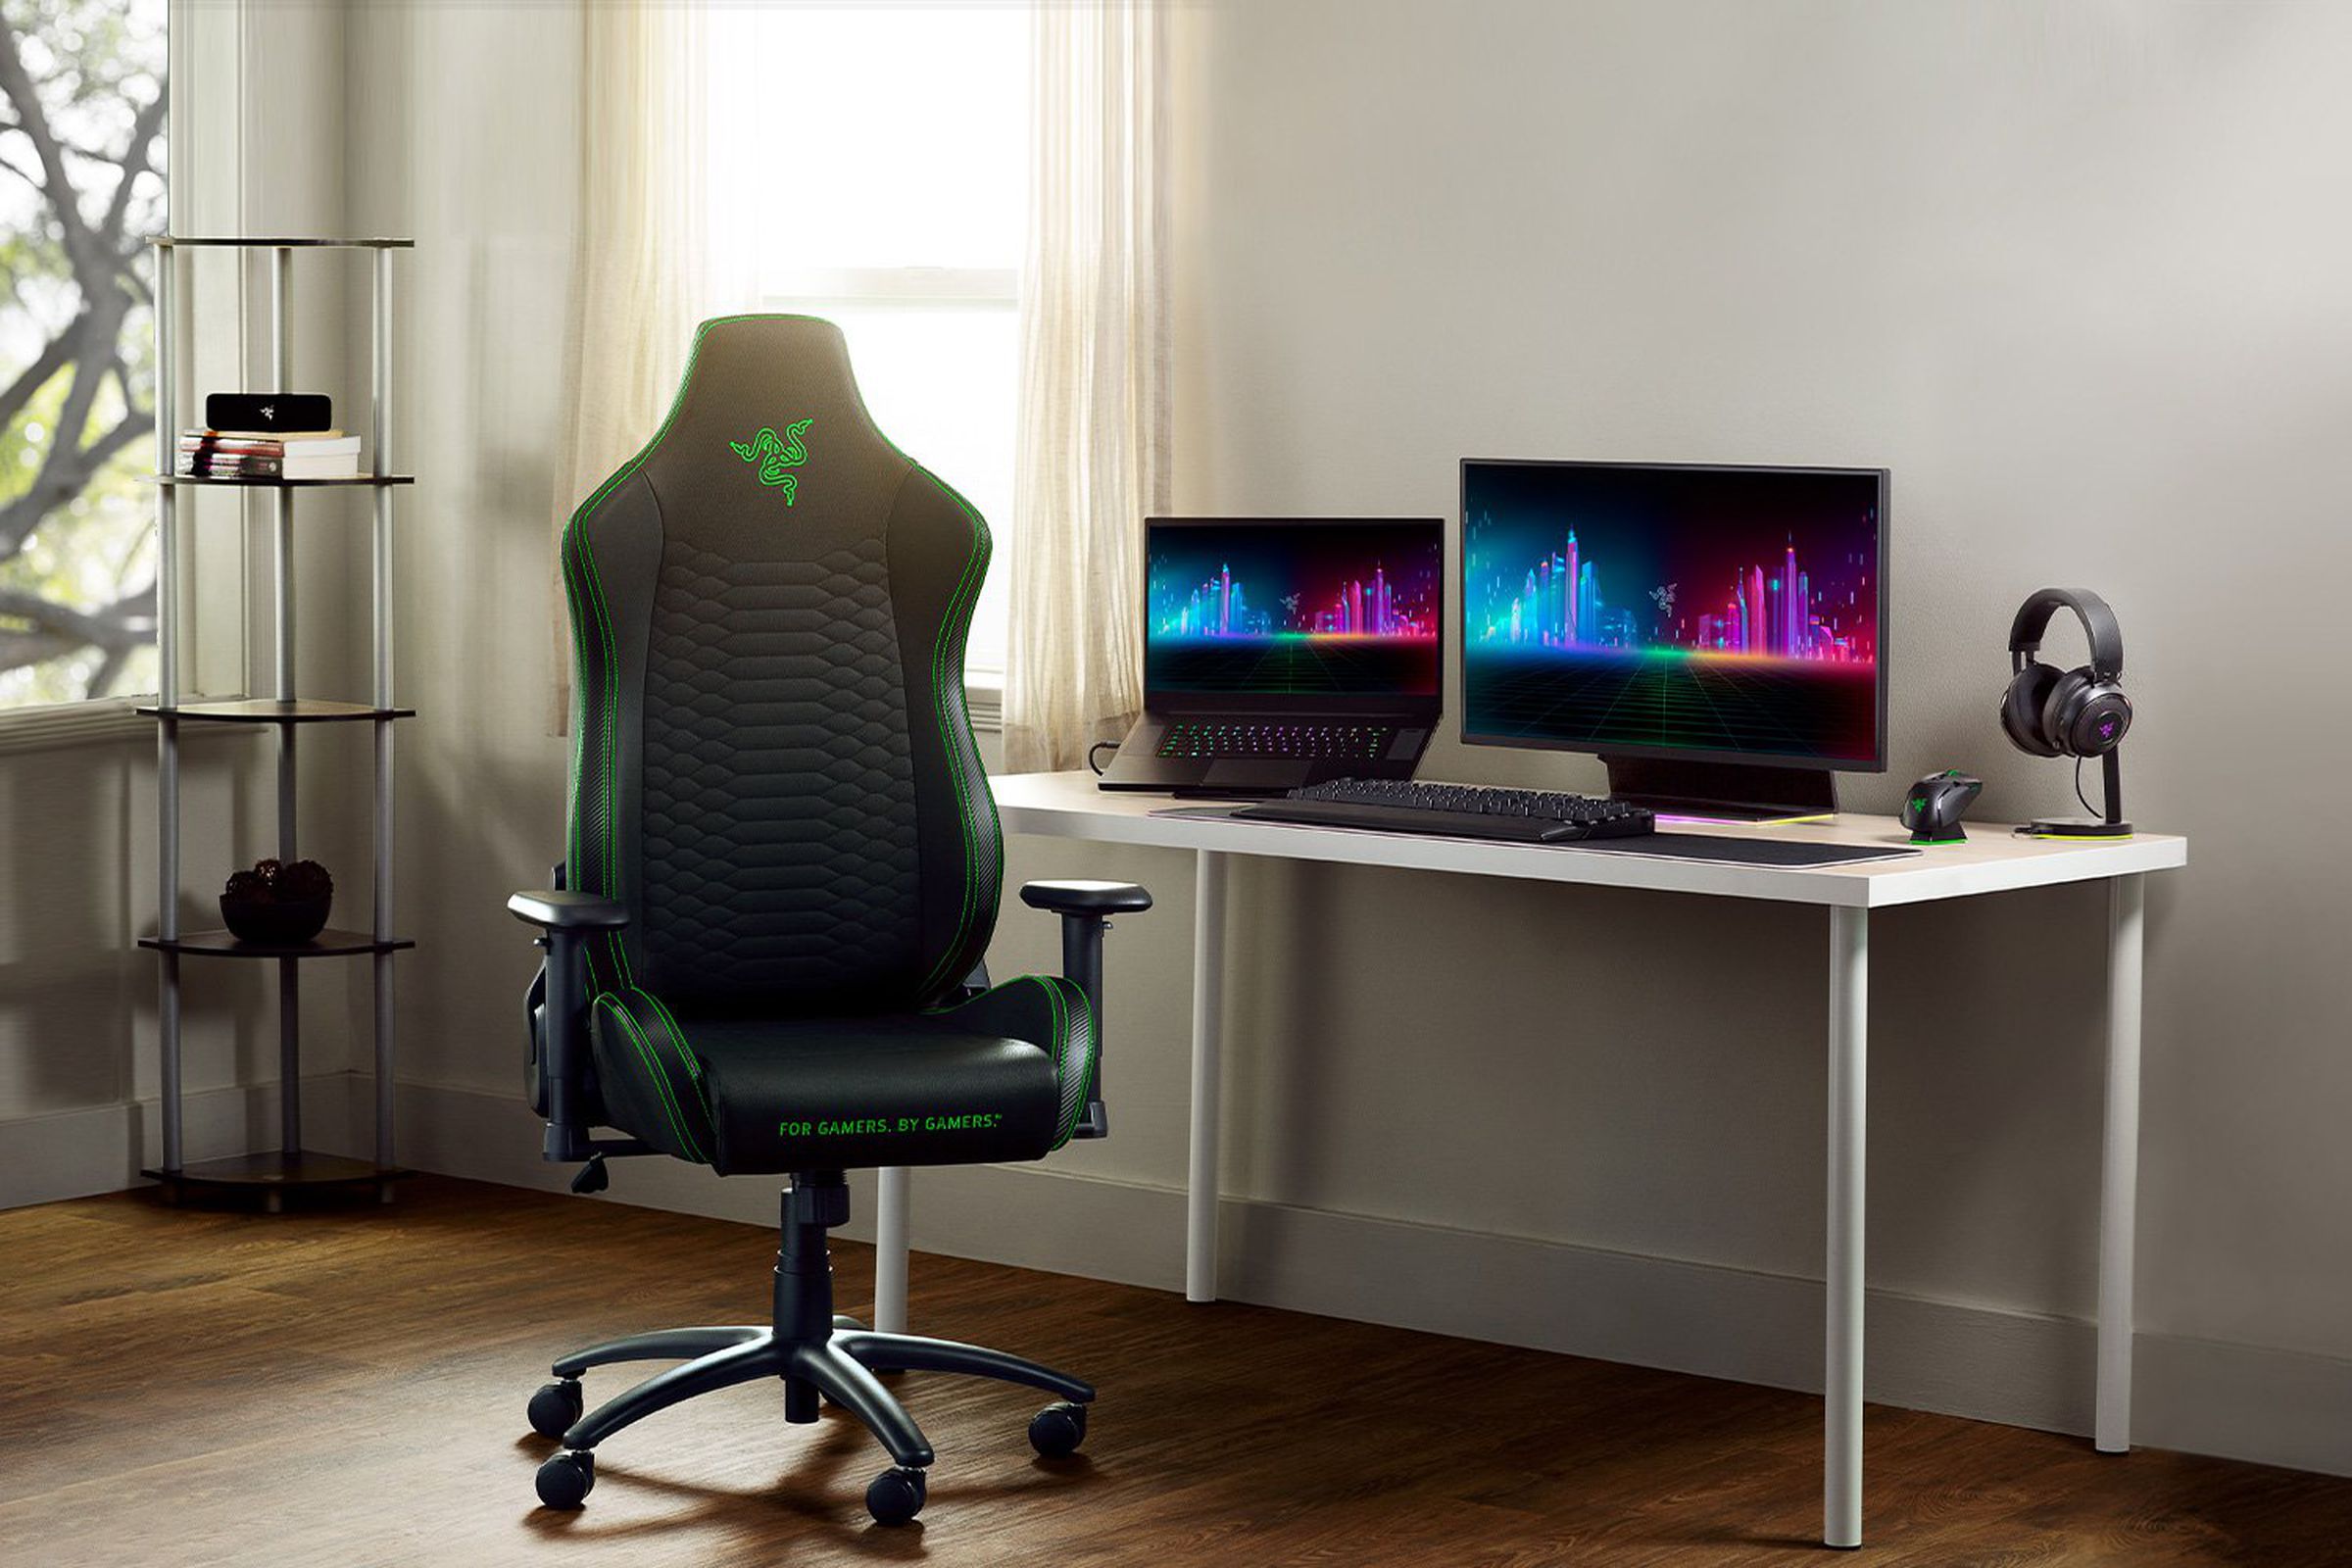 Both the Iskur X and Enki gaming chairs are discounted